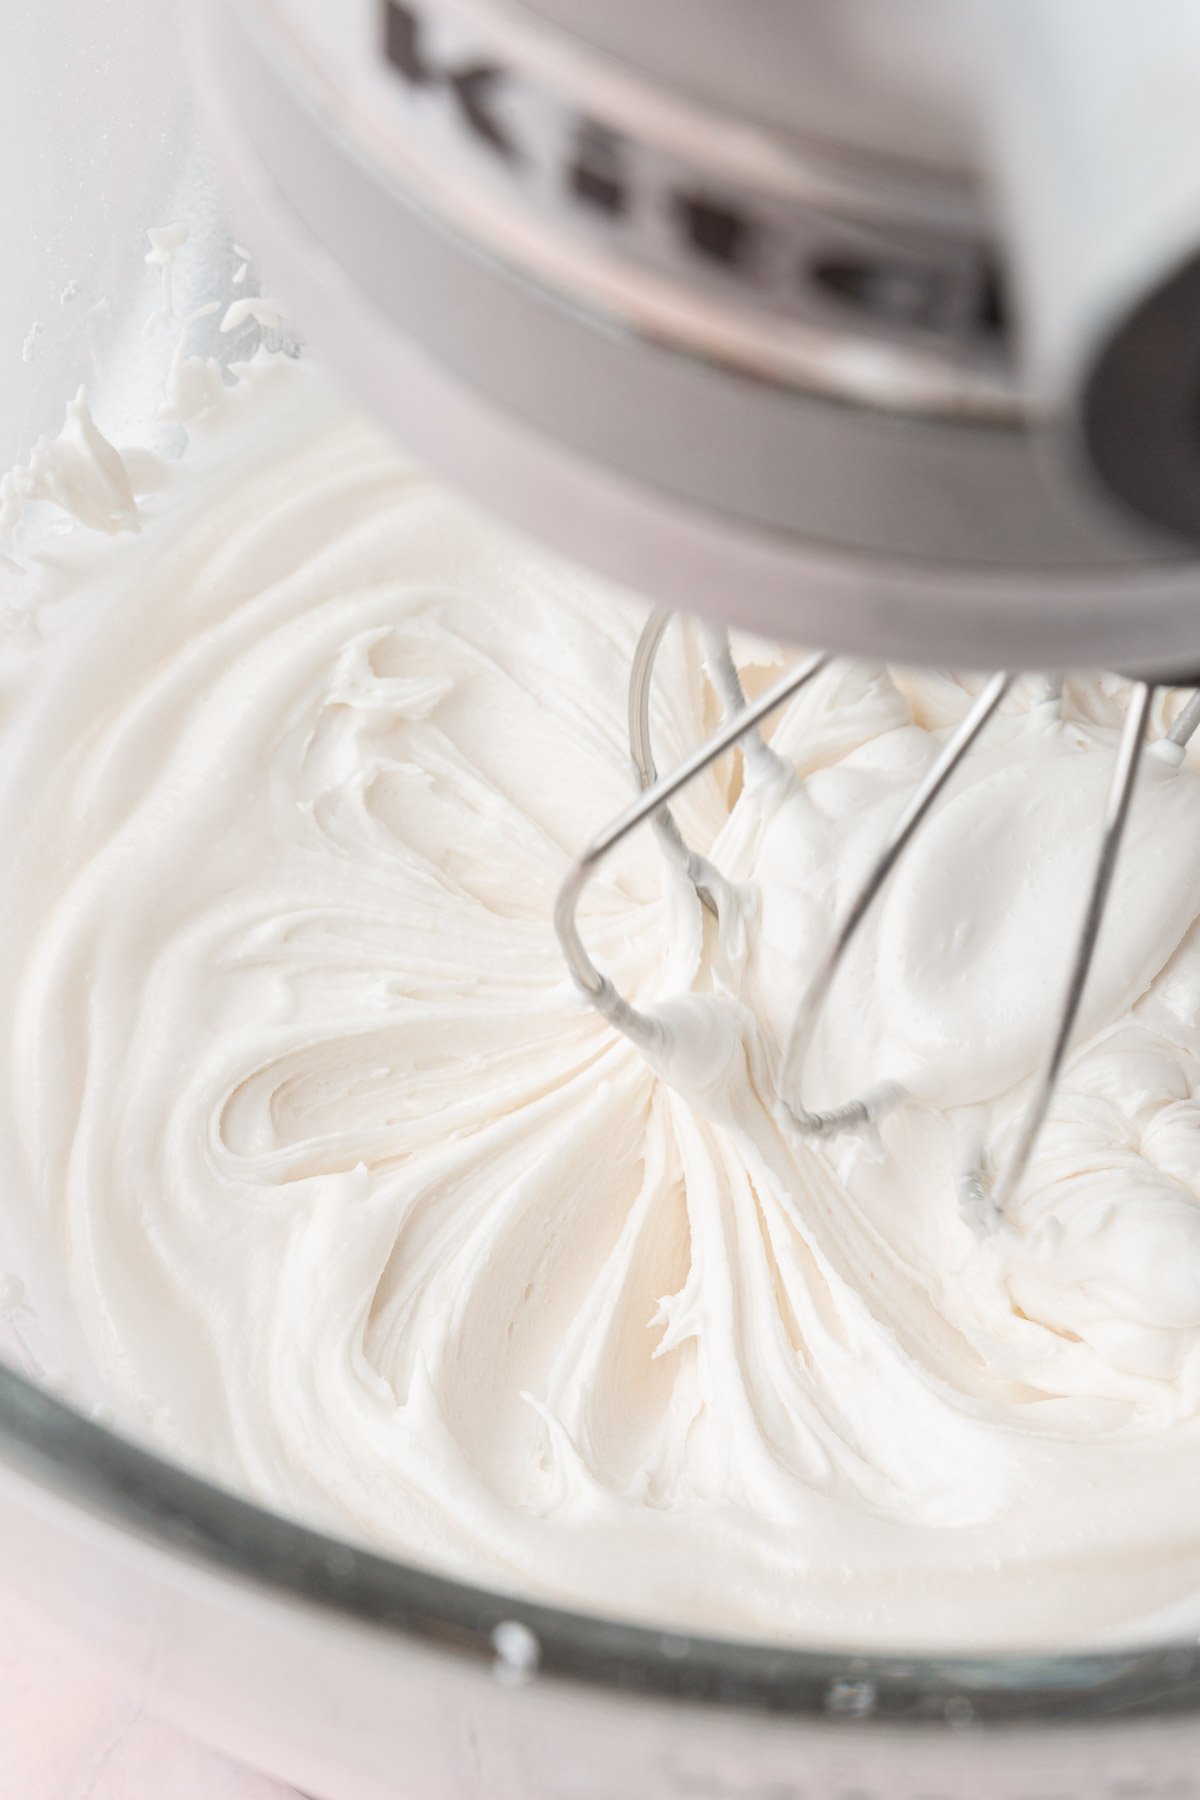 A stand mixer with a glass mixing bowl with the whisk attachment mixing a bowl of white royal icing.